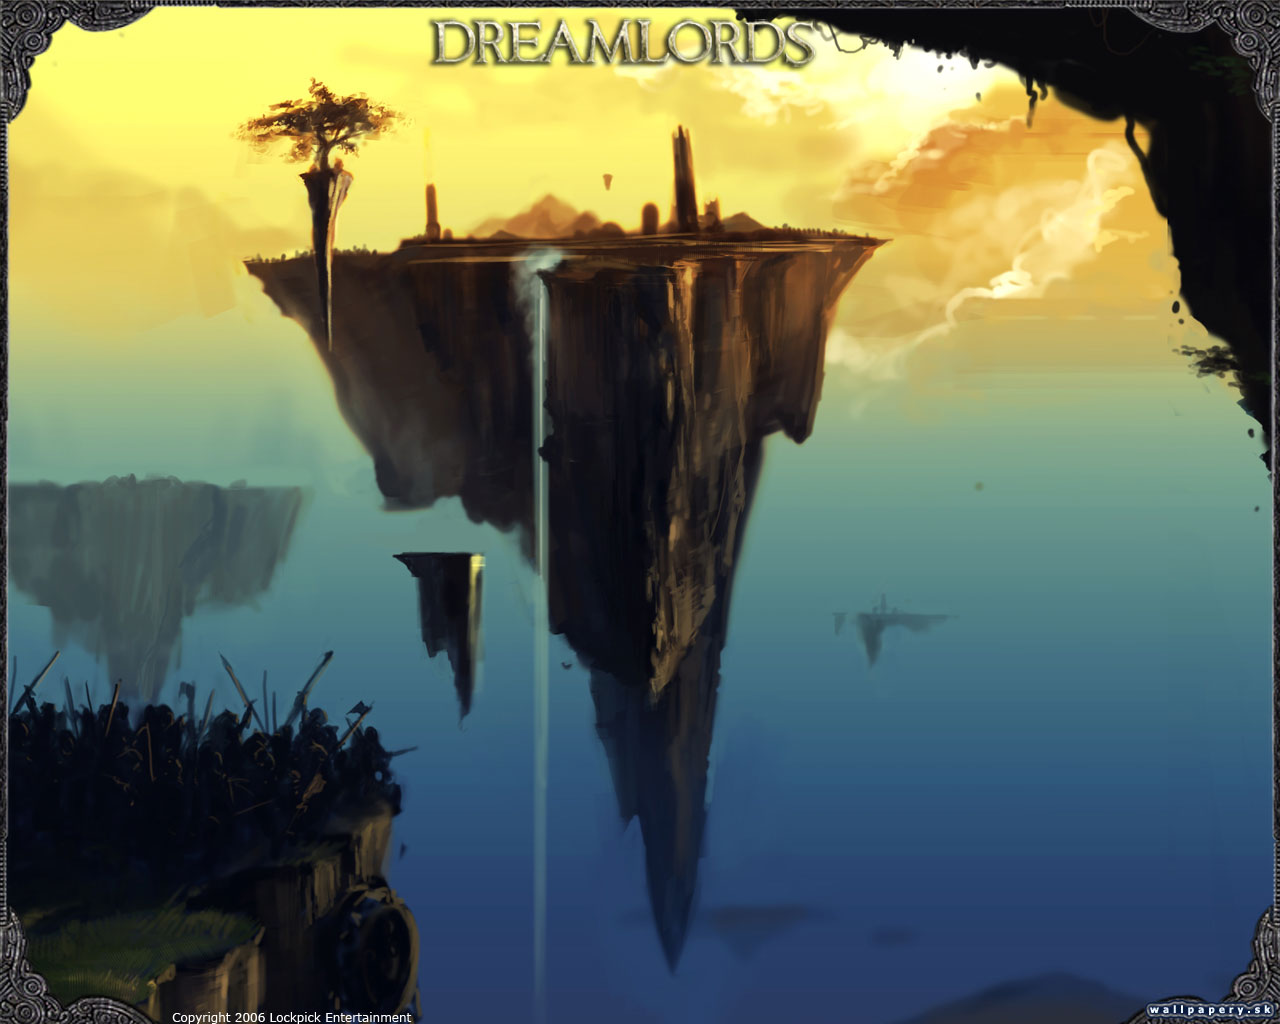 Dreamlords - wallpaper 5